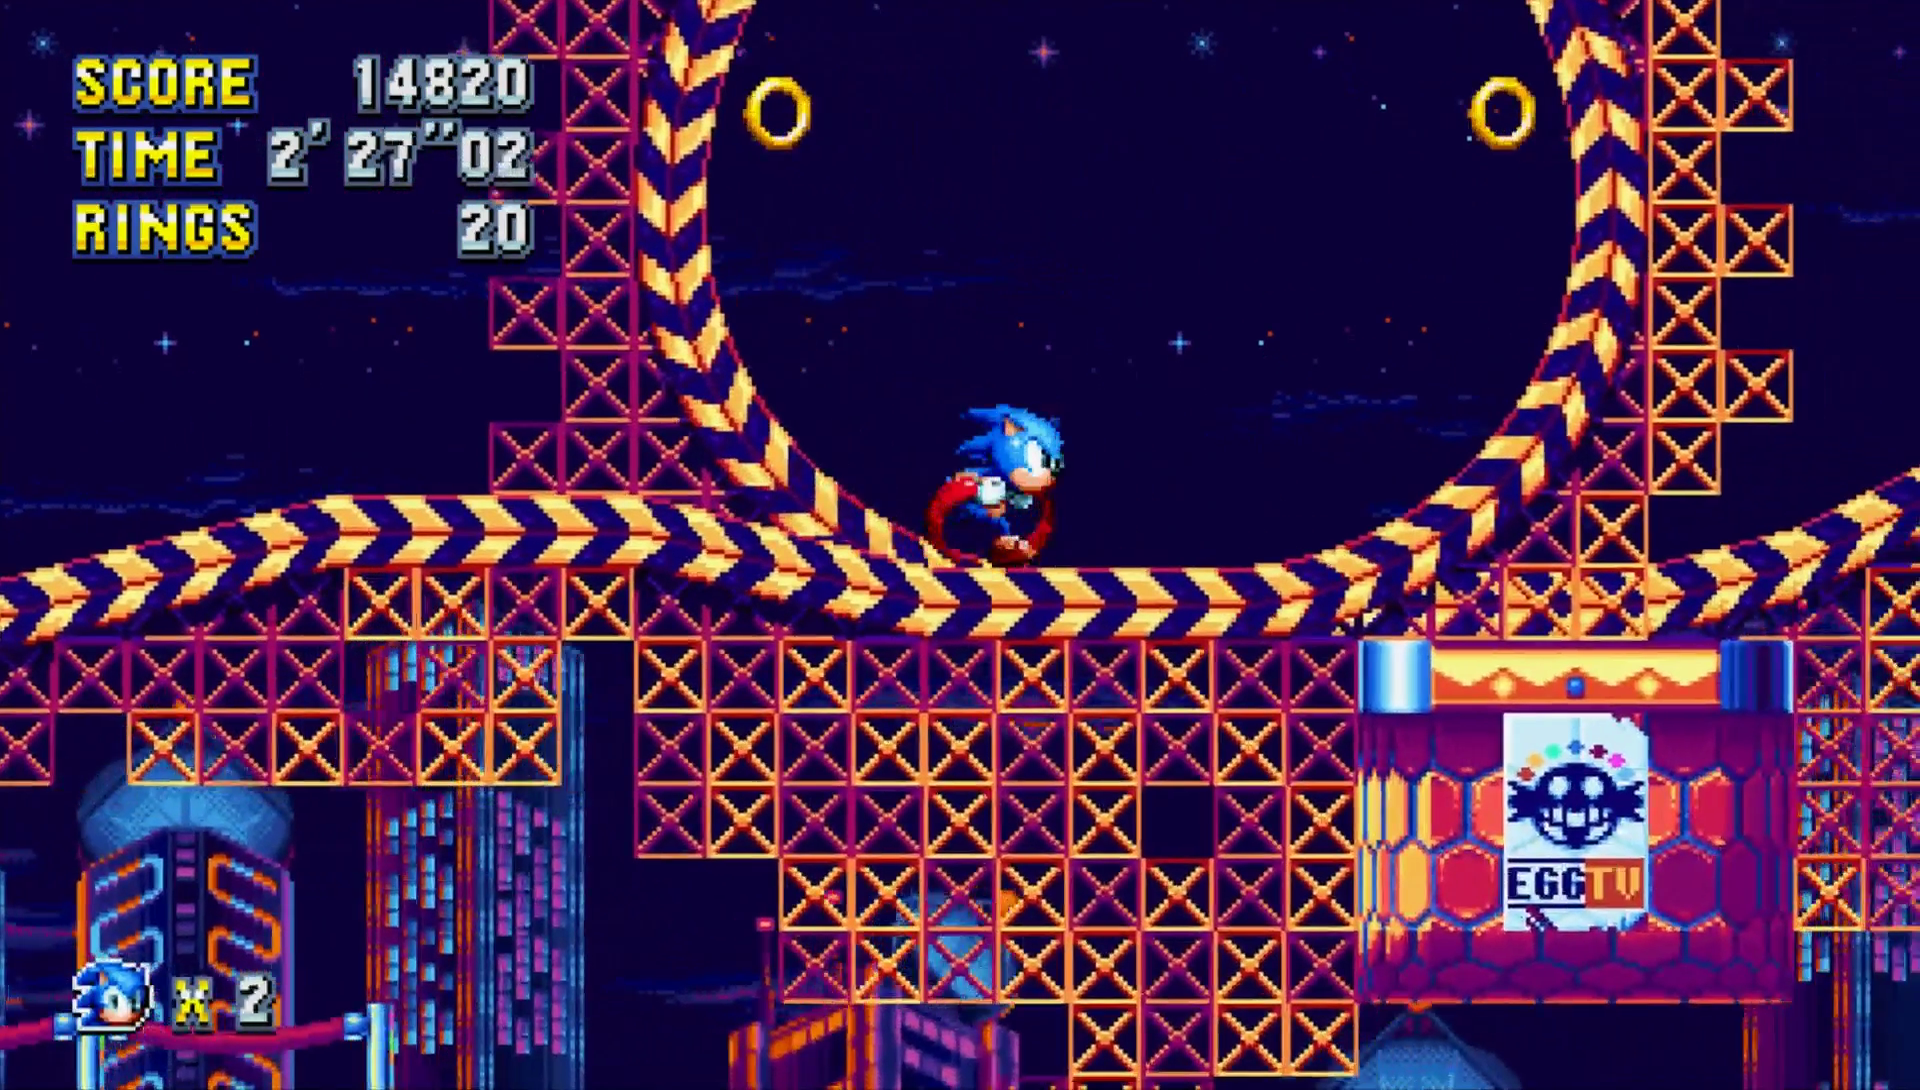 Sonic Mania: Most Up-to-Date Encyclopedia, News & Reviews